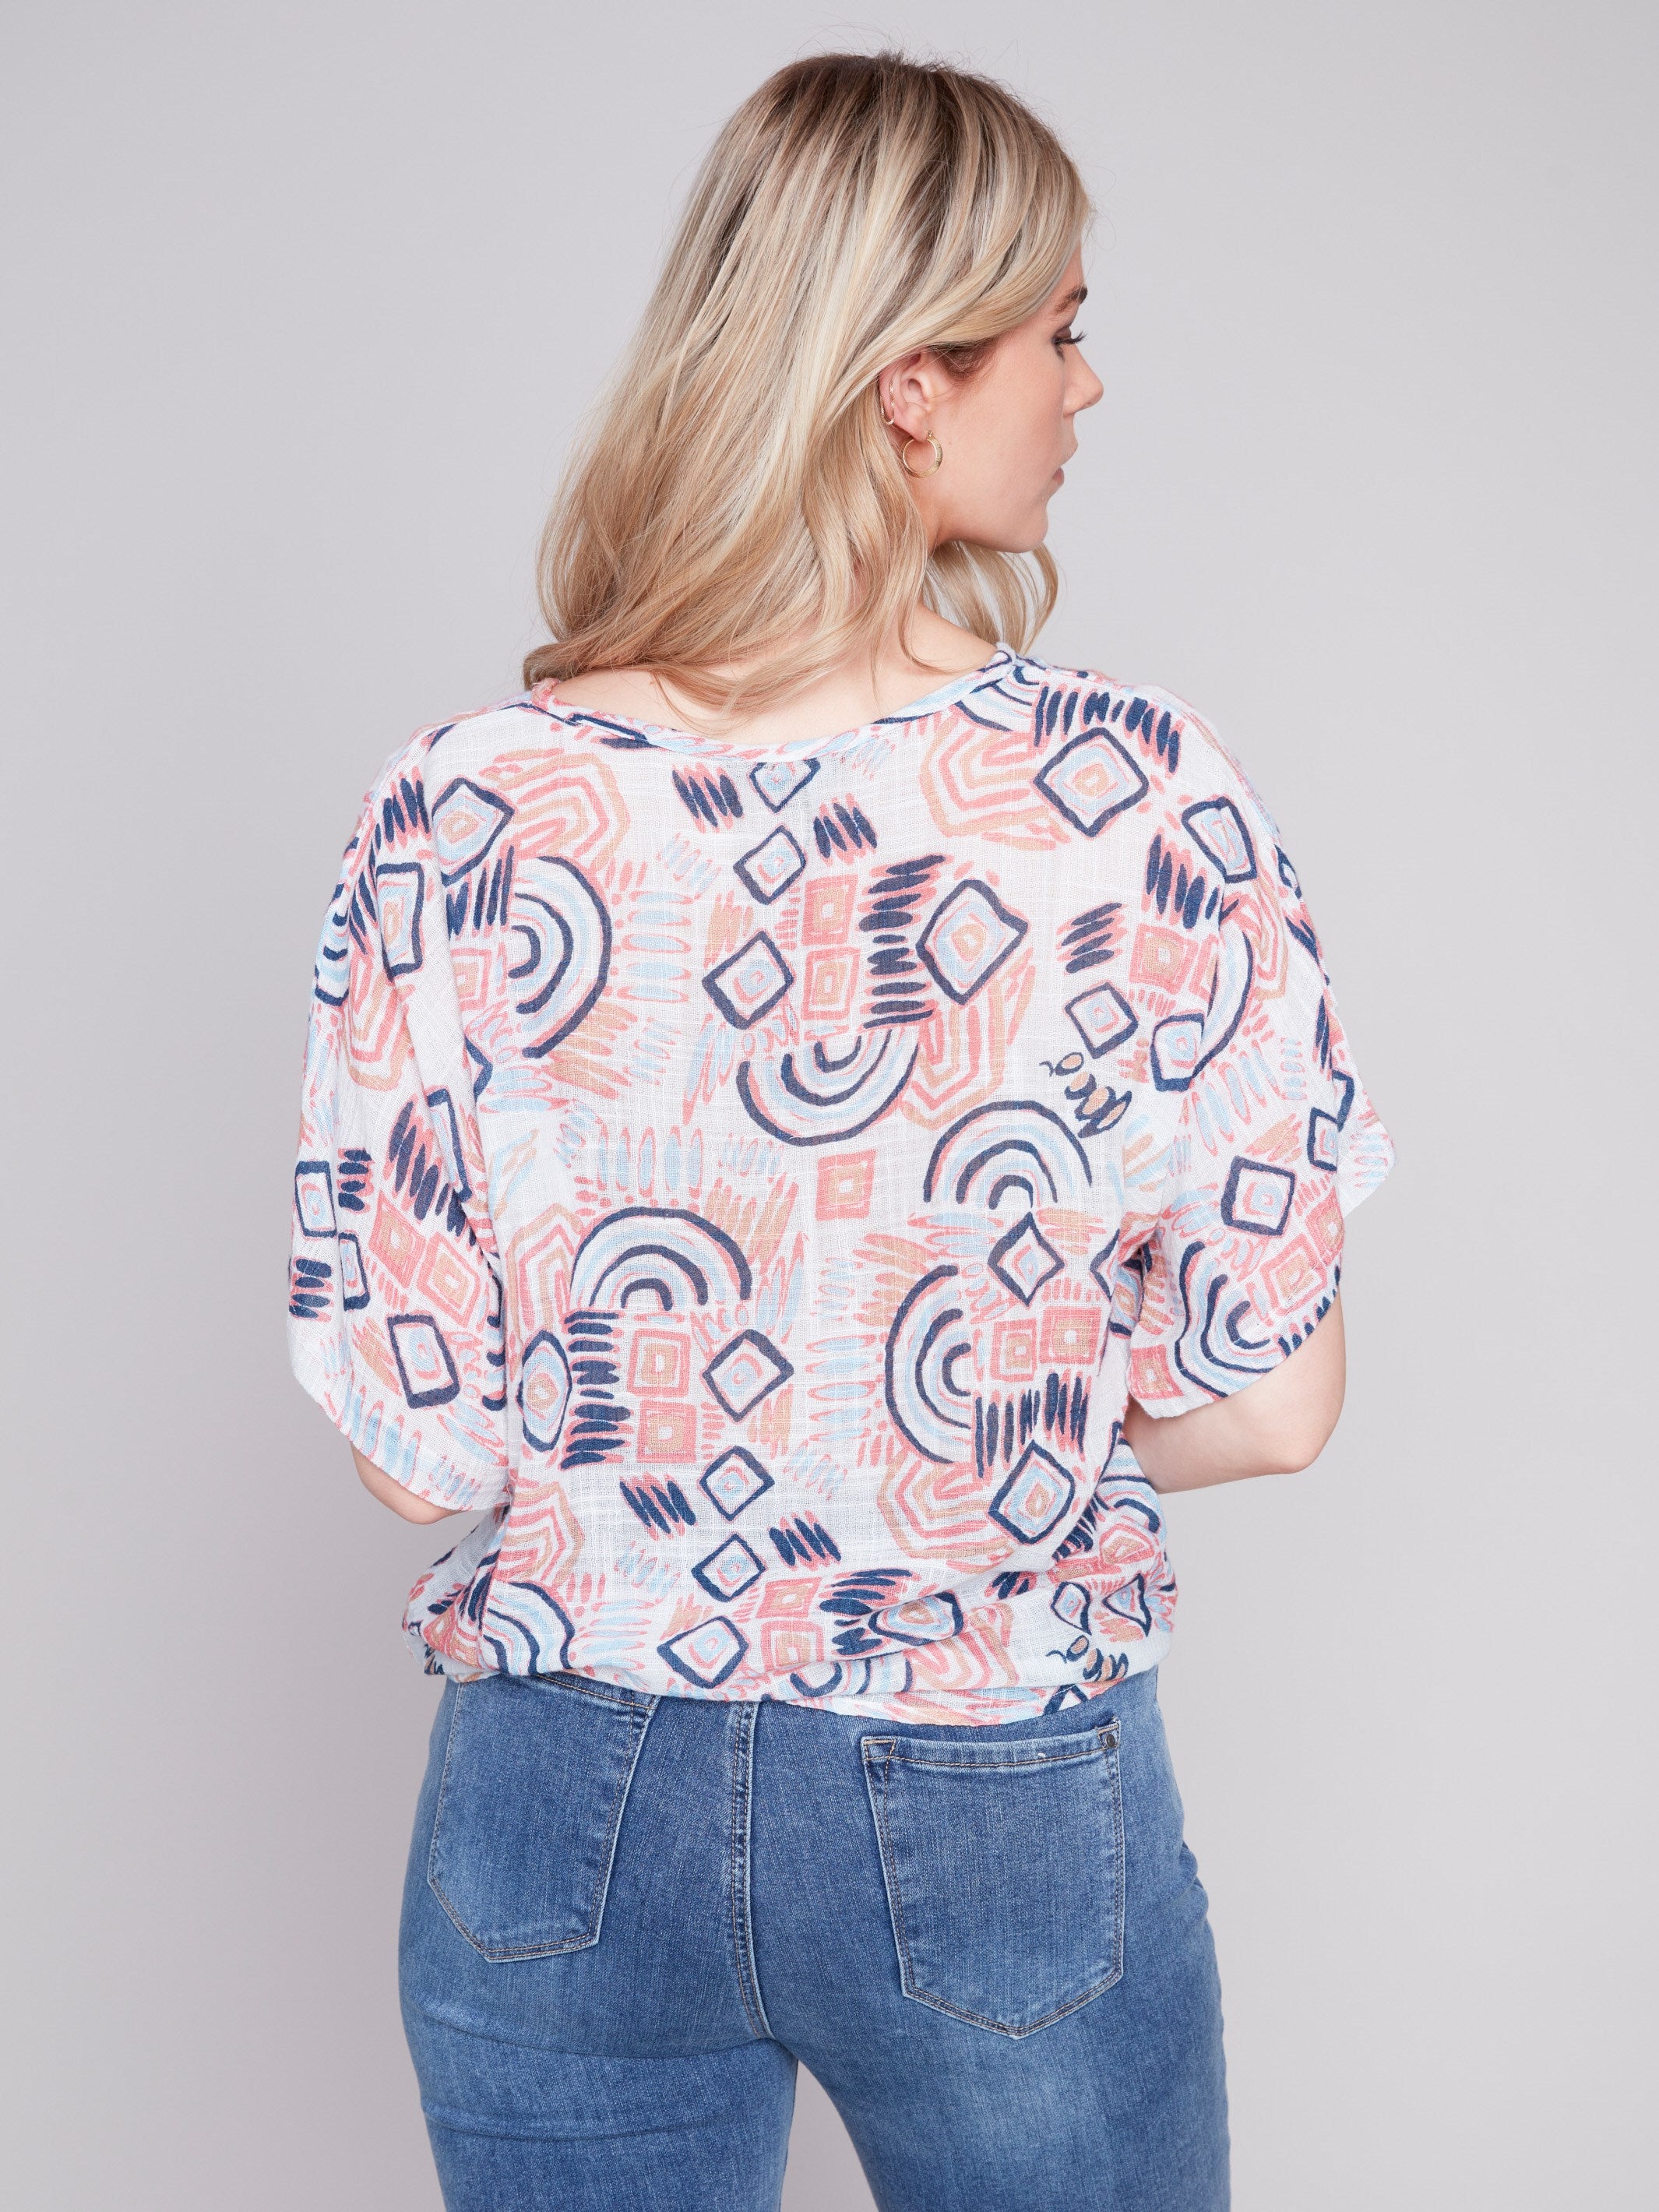 Charlie B Printed Cotton Gauze Blouse with Side Tie - Scribble - Image 2